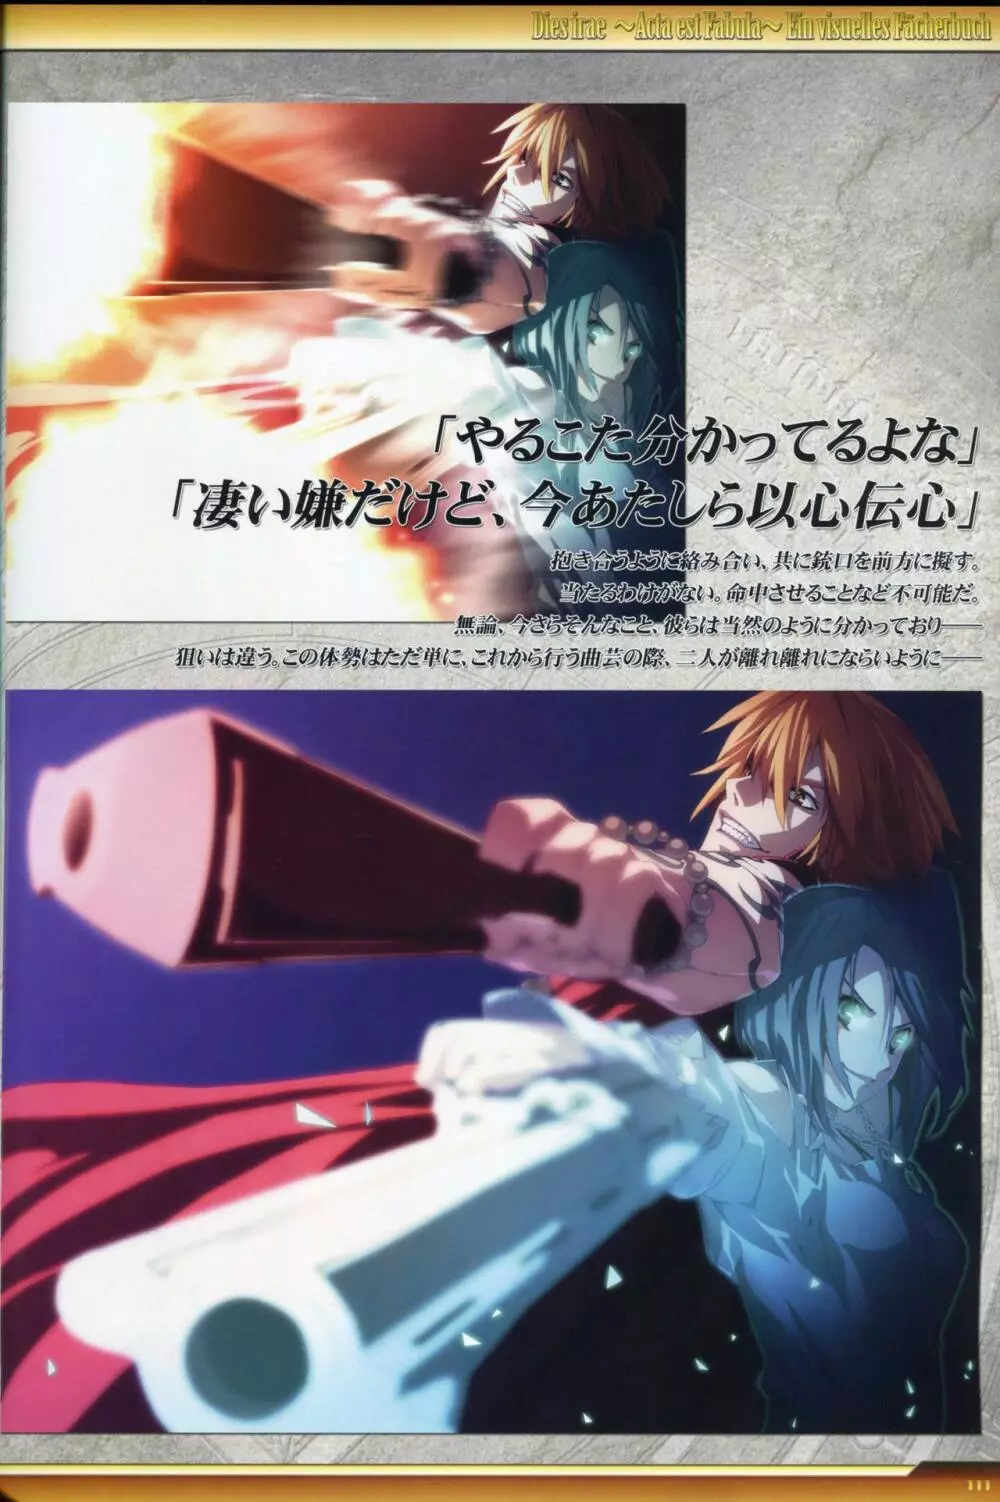 Dies irae Visual Fanbook - White Book Page.112